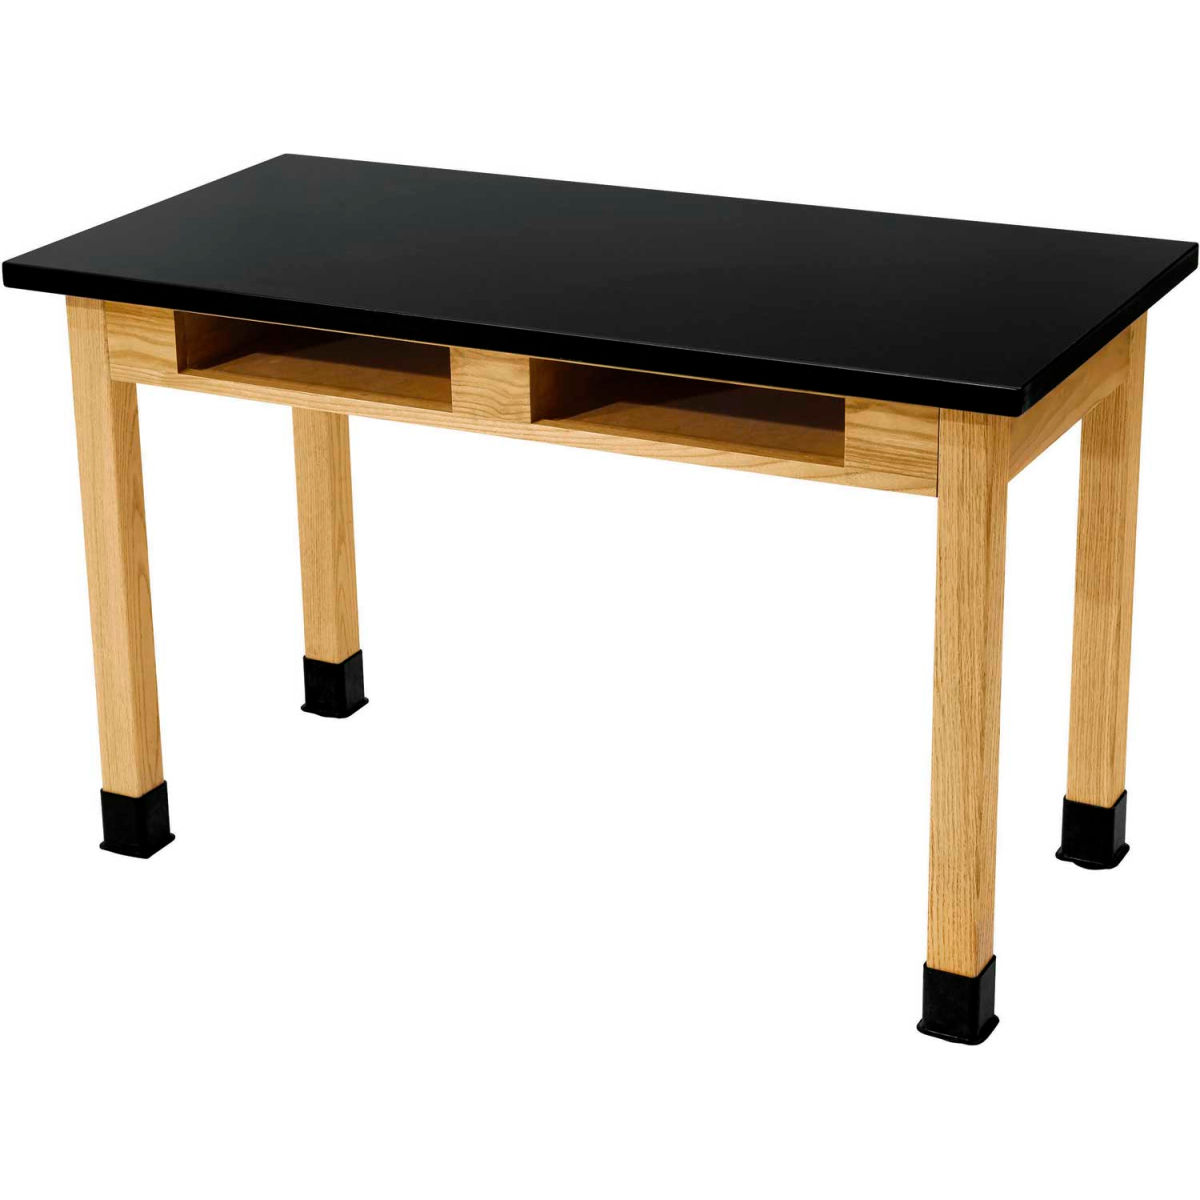 B1109961 Science Lab Table with Compartment & Chemical Resistant Top - Black with Oak Leg - 48 x 24 x 30 in -  National Public Seating